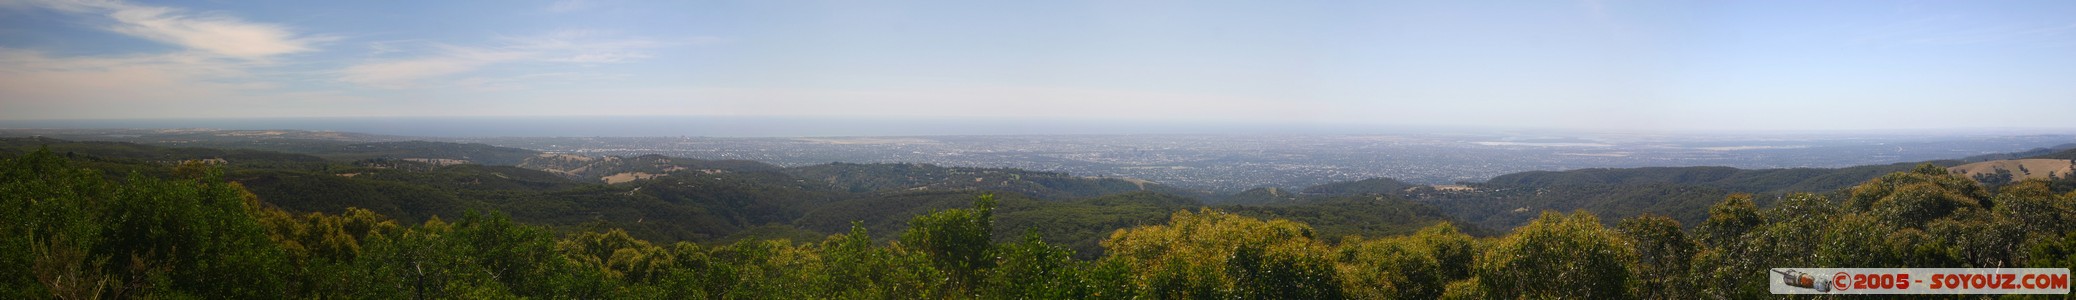 View on Adelaide from the hills - panoramique
Mots-clés: panorama